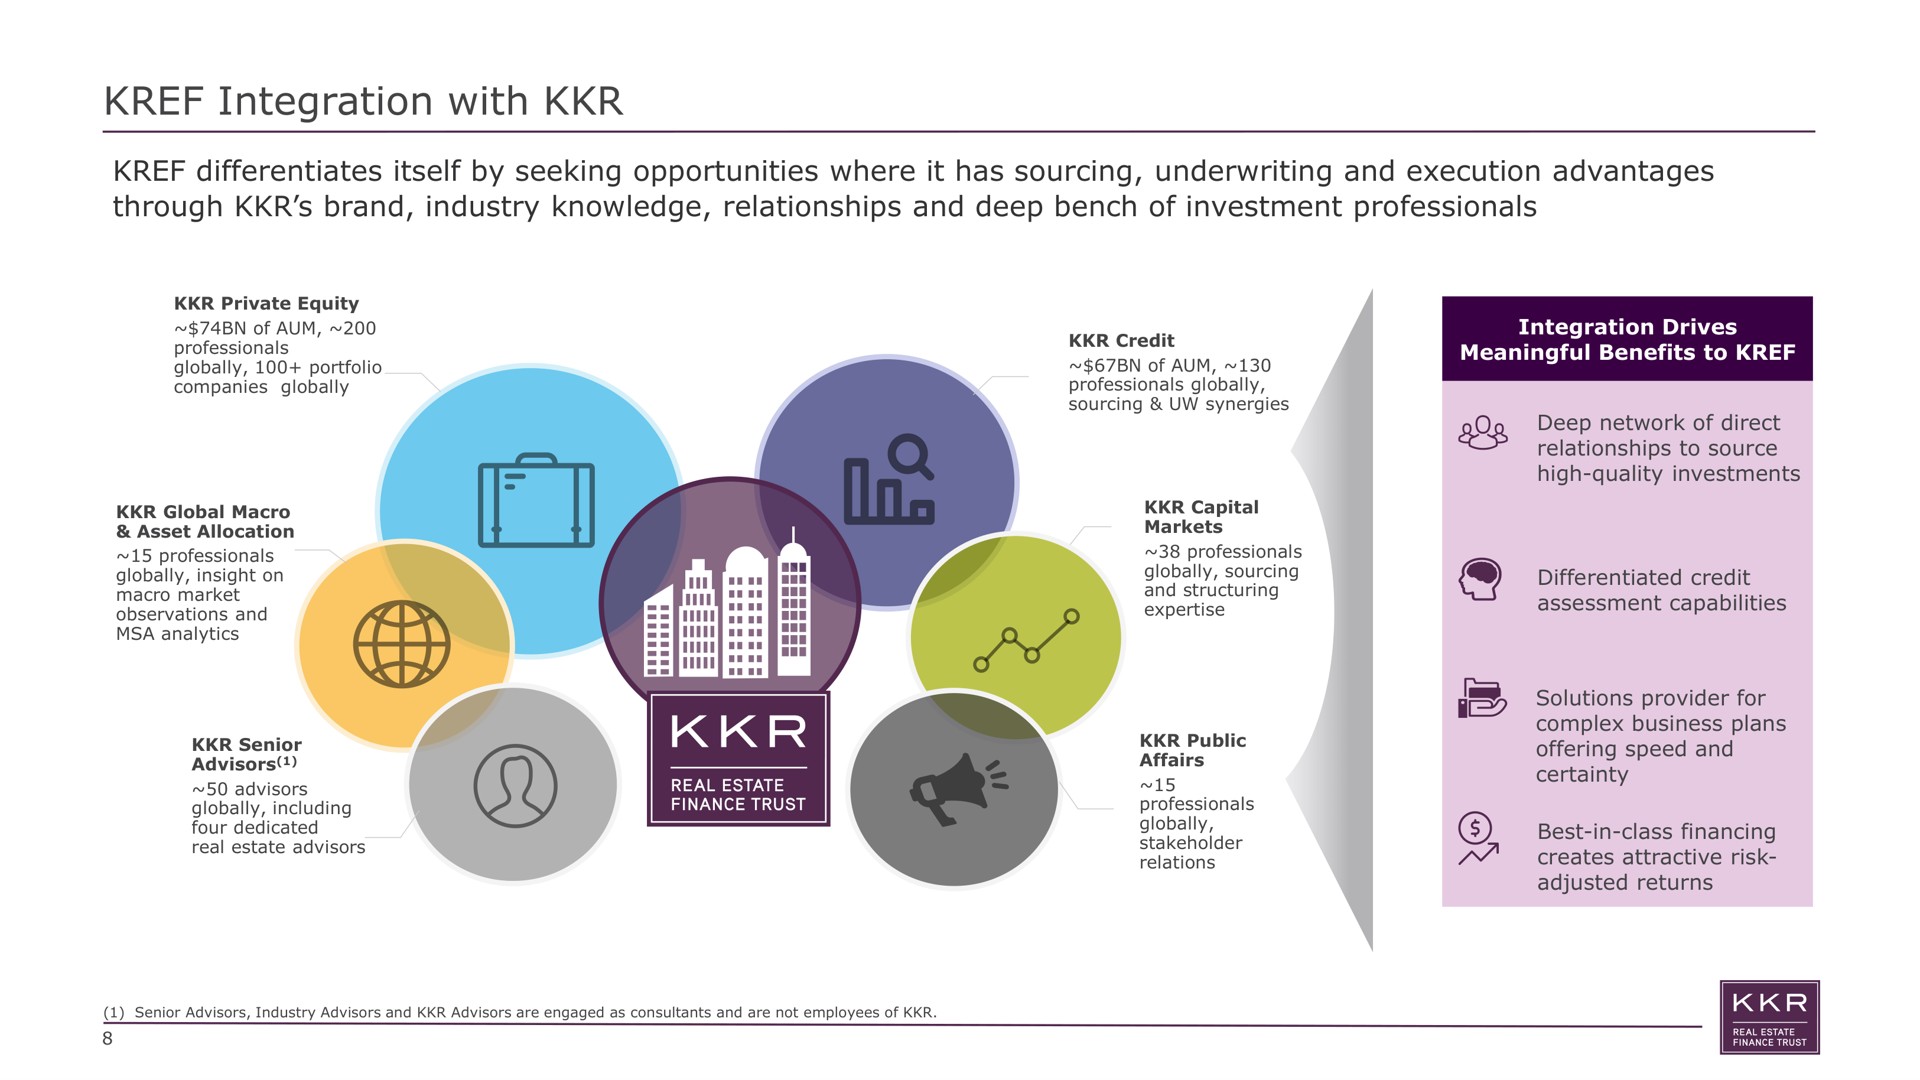 integration with differentiates itself by seeking opportunities where it has sourcing underwriting and execution advantages through brand industry knowledge relationships and deep bench of investment professionals i | KKR Real Estate Finance Trust